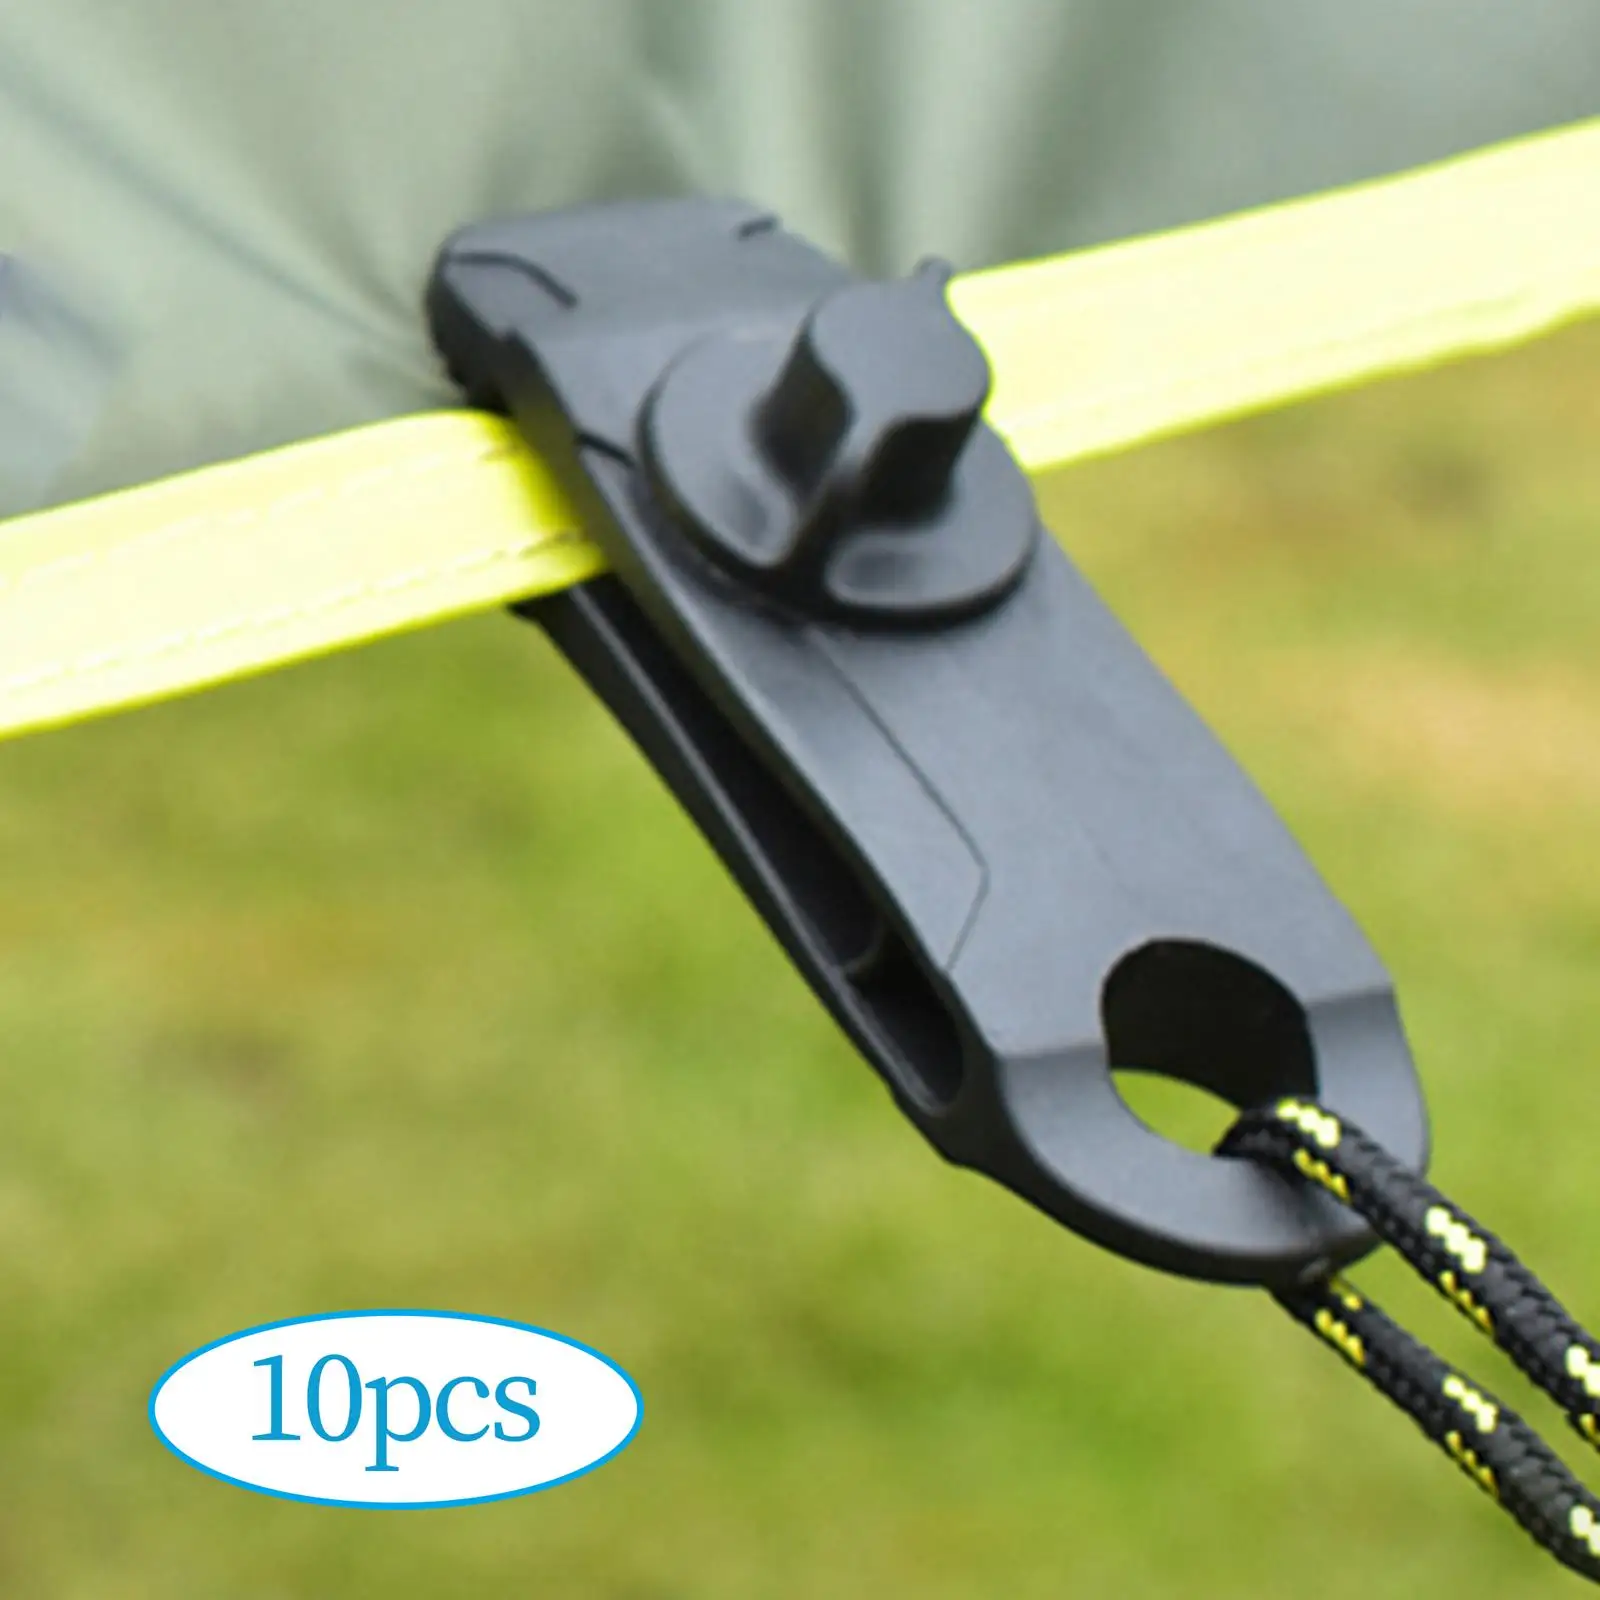 10 Pieces Tent Canopy Cloth Clips Awning Clip Adjustable for Car Covers